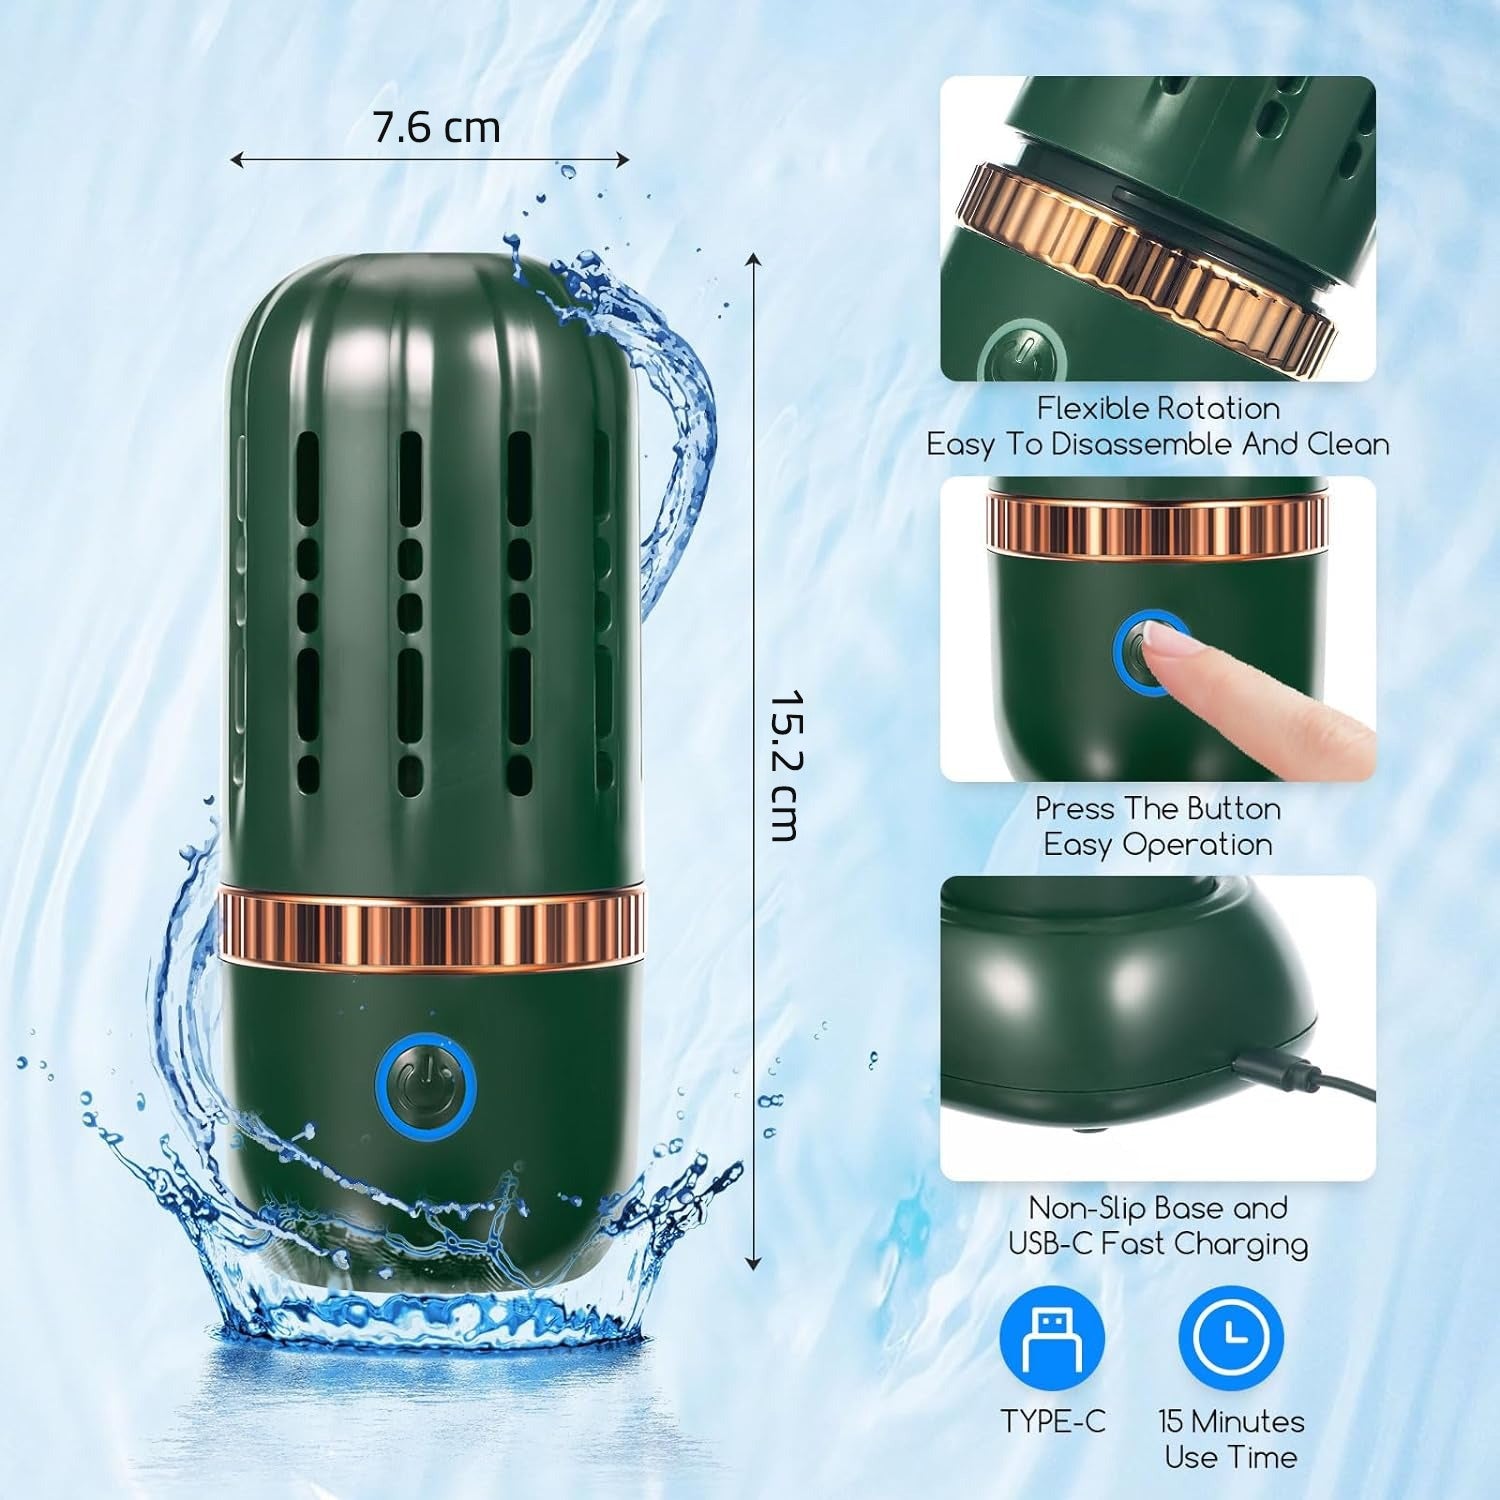 size and details of Electric Waterproof Fruit and Vegetable Washing Machine 